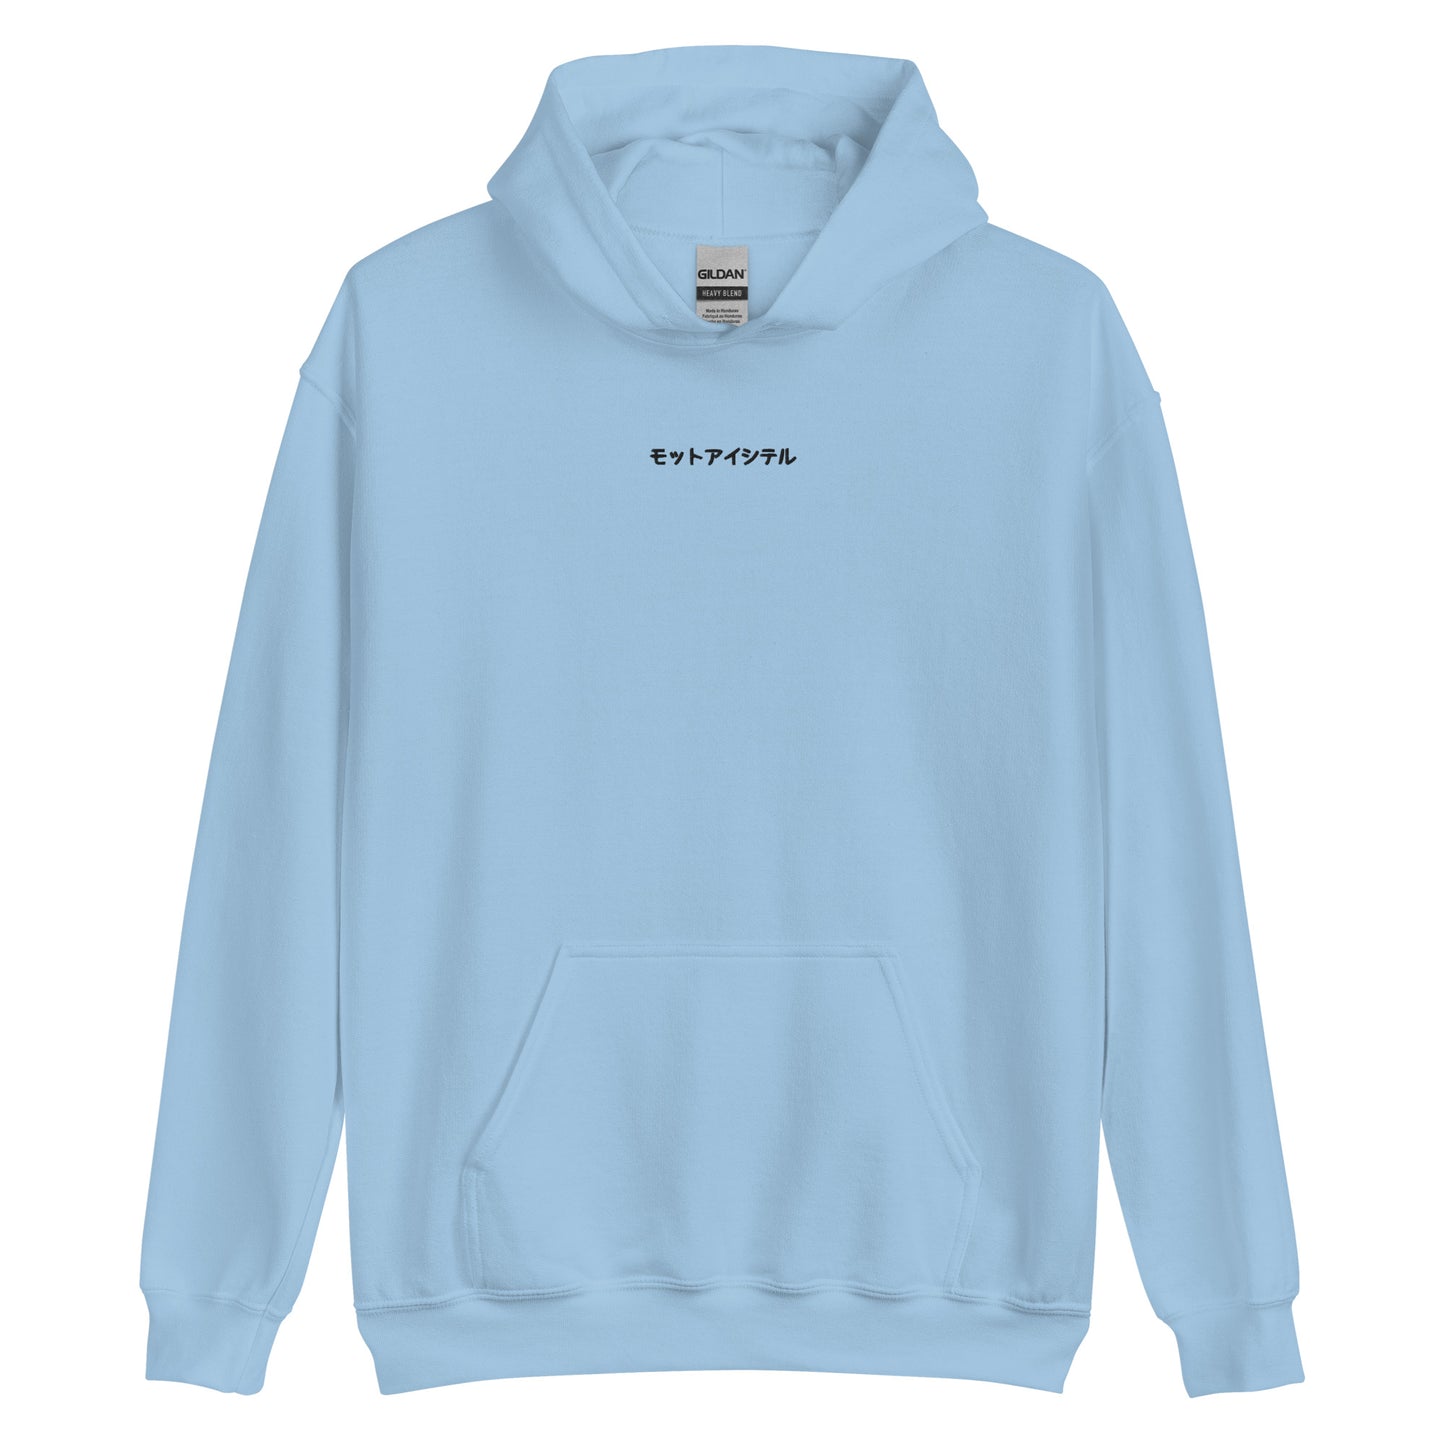 I Love You Embroidered Japanese Hoodie